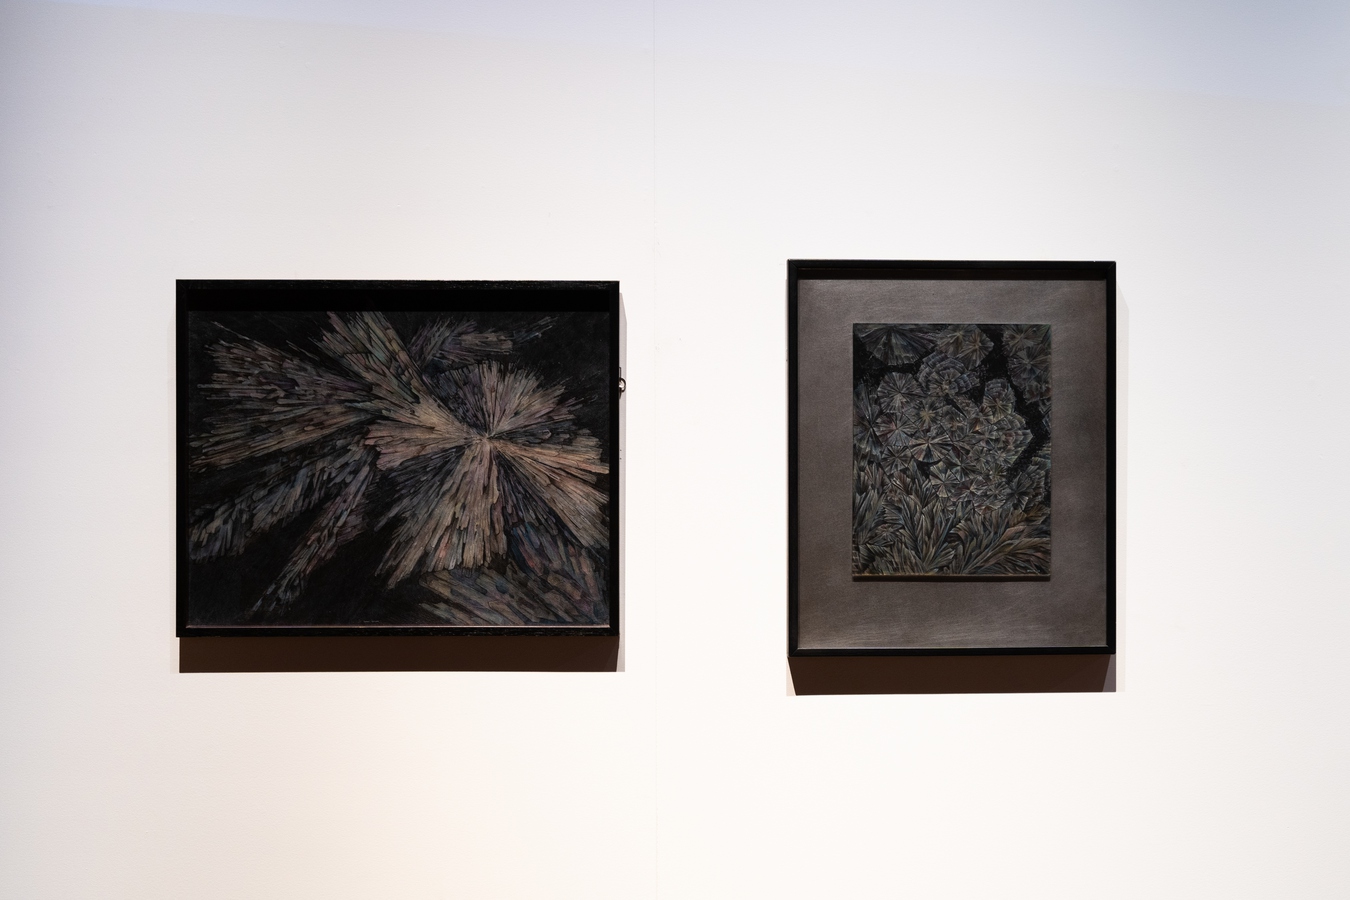 Image: Carol Ann Bauer, Sodium Citrate (left), Crystals (D-L Aspartic) (right), both 1982. Acrylic on perspex. Photo by Rosa Nevison.